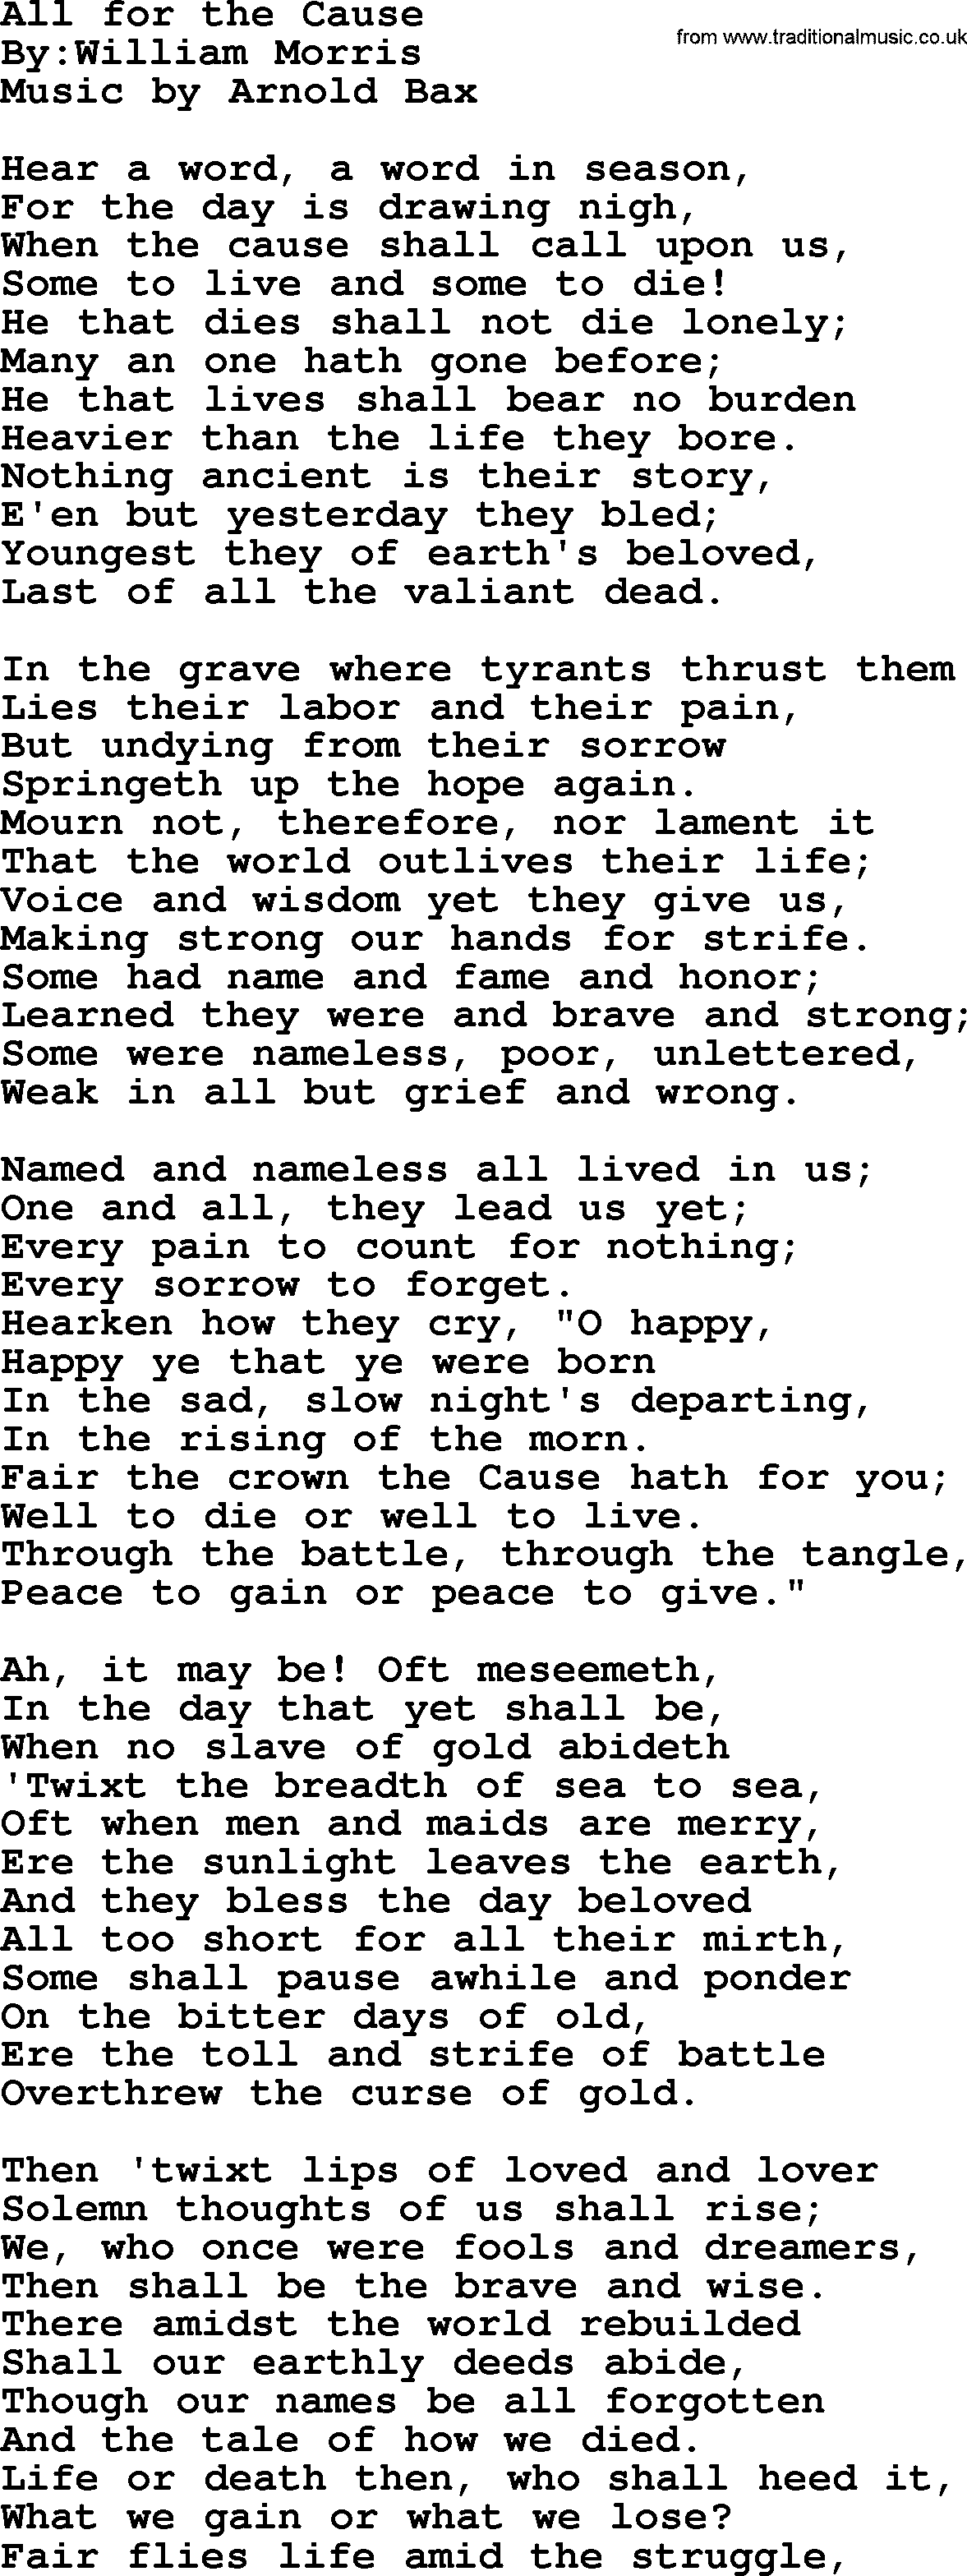 Political, Solidarity, Workers or Union song: All For The Cause, lyrics